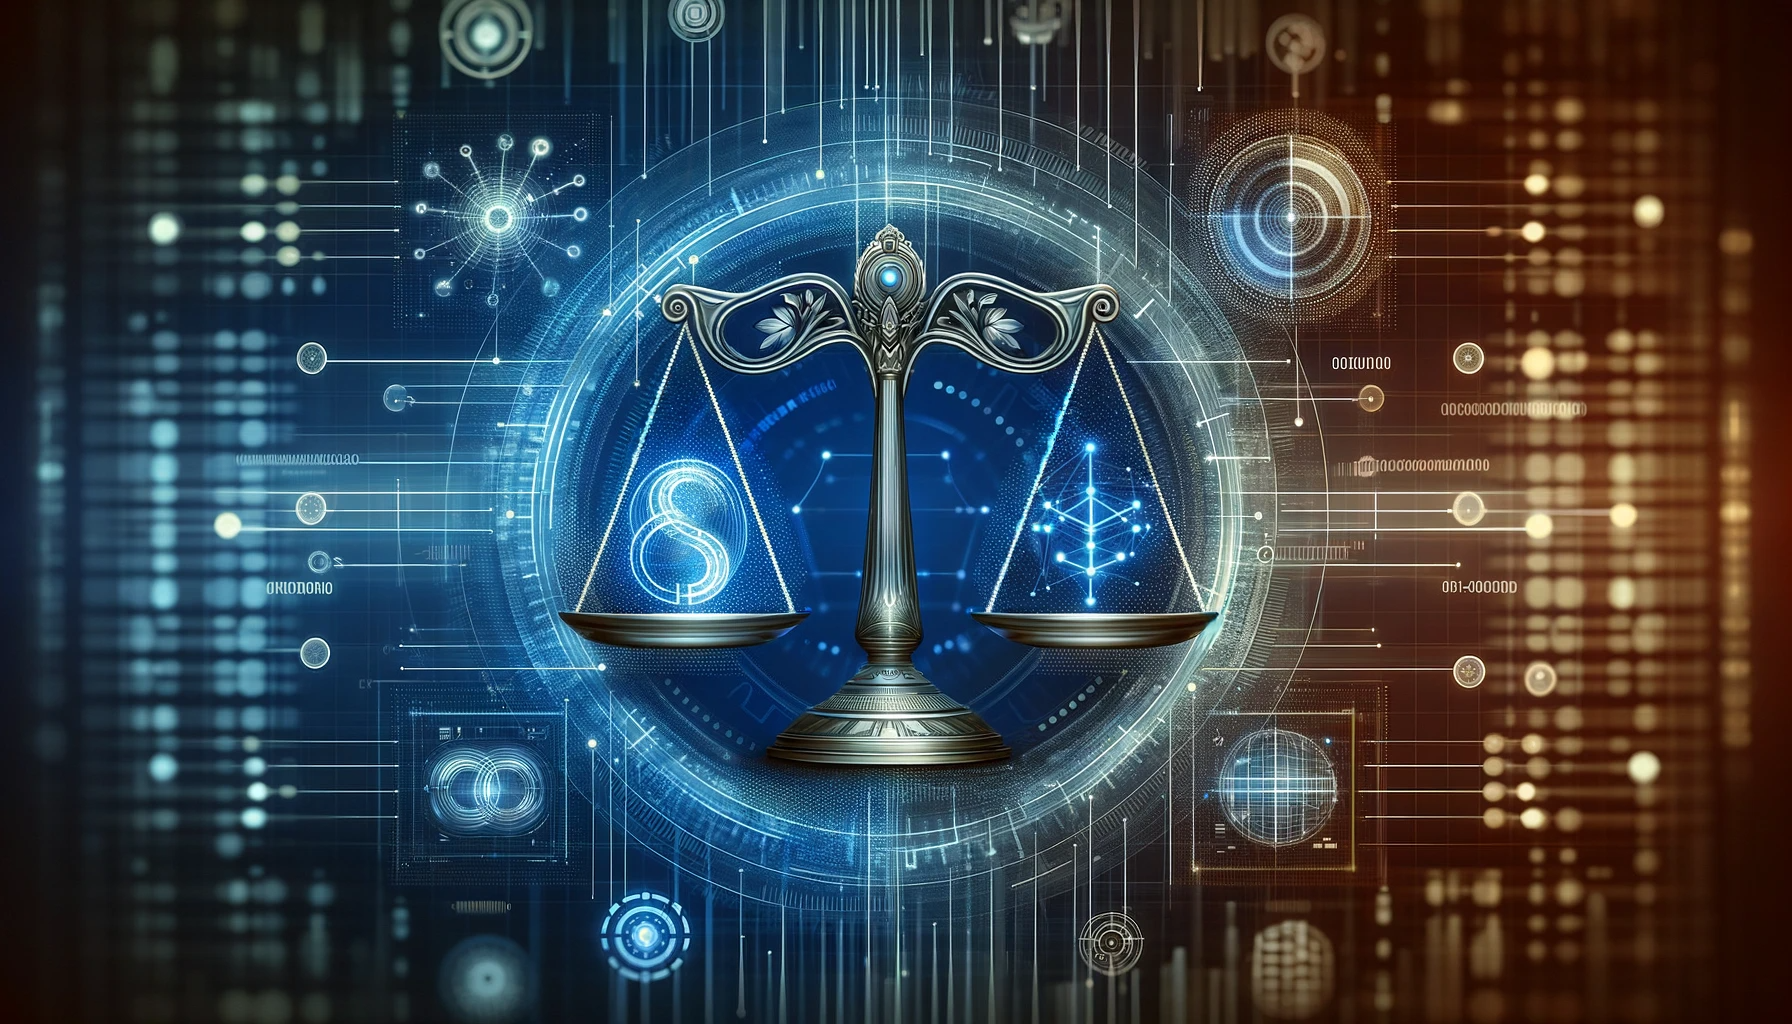 An abstract digital art representing business ethics in the digital age, with symbolic elements like a balance scale, digital data streams, and AI